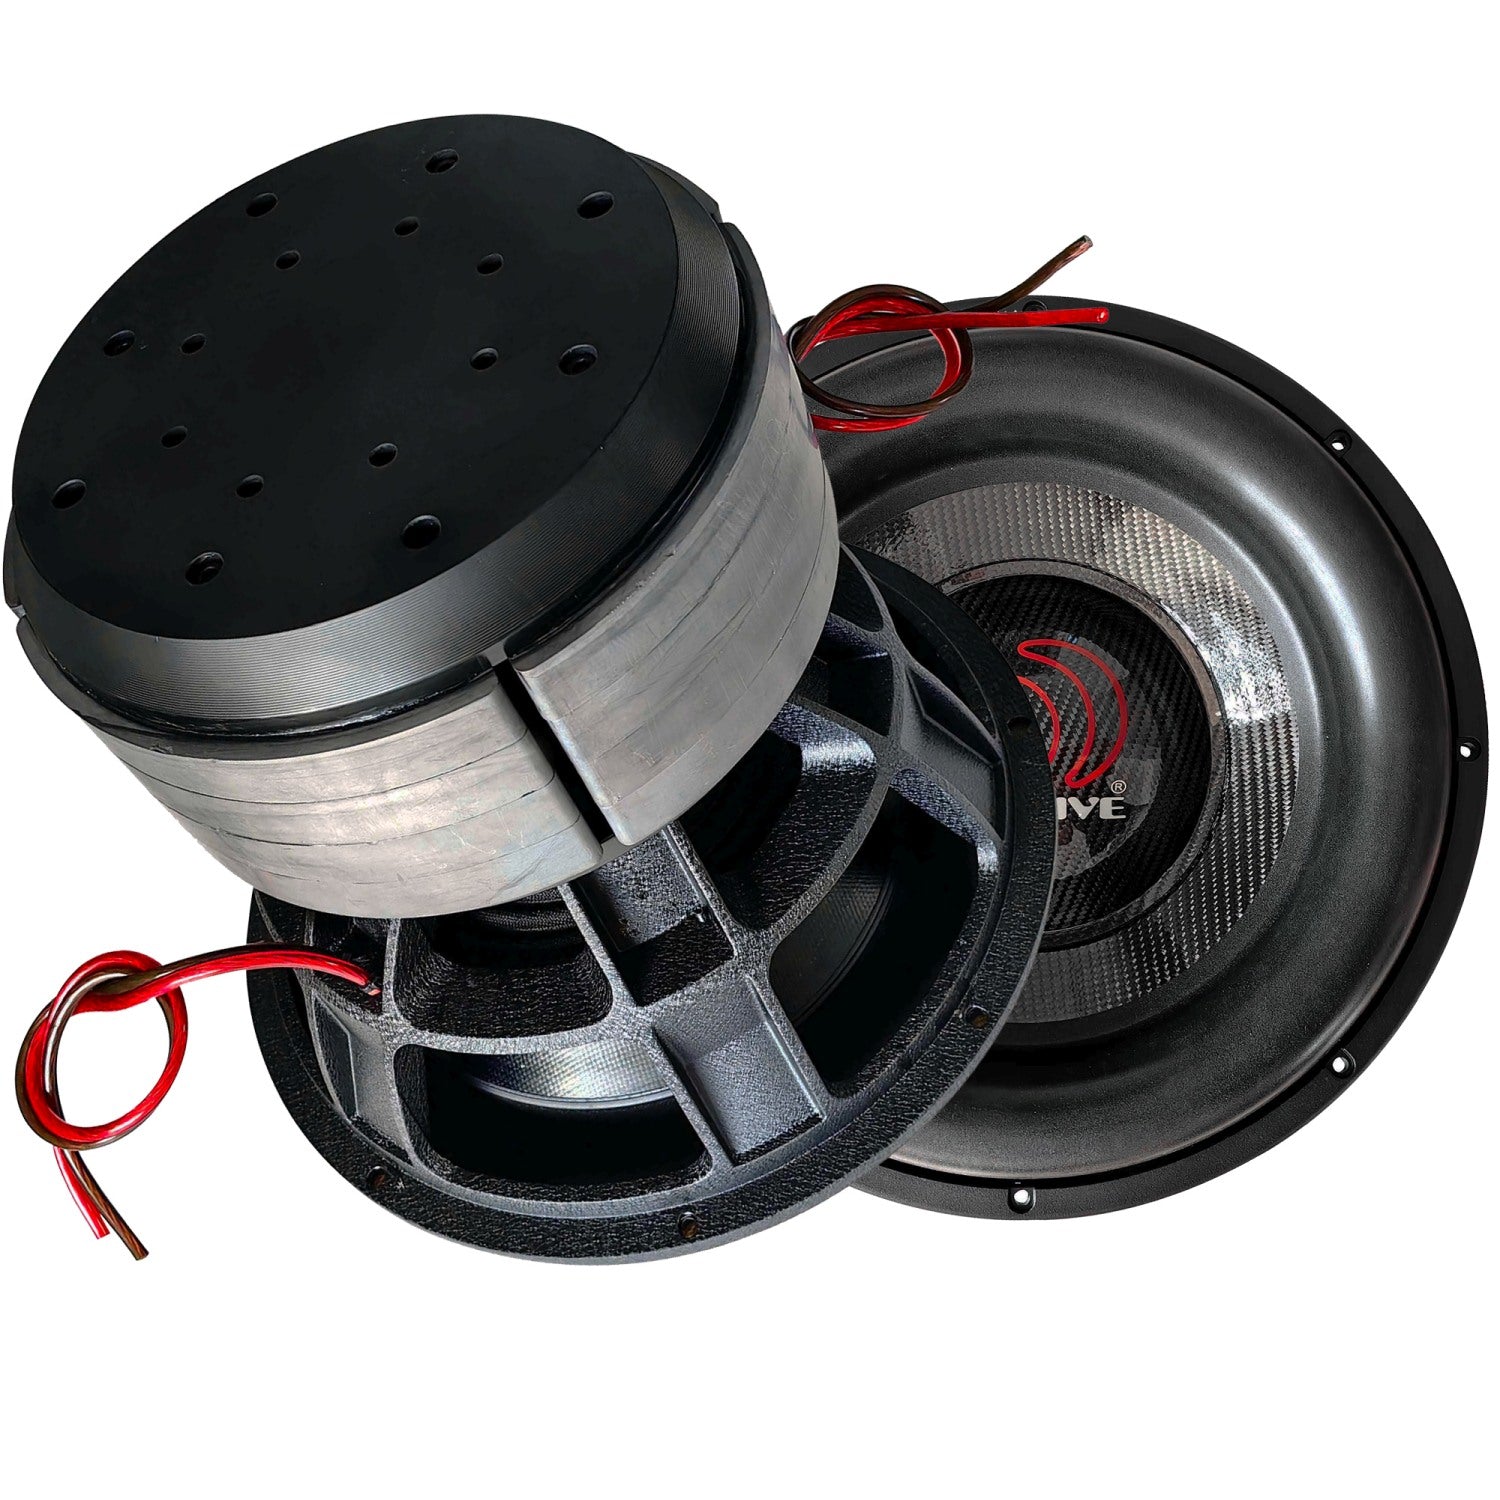 BOA151R - 15" 8,000 Watts RMS Dual 1 Ohm Mega Subwoofer - Caution* Product is 132 Lbs. and Requires Special Handling